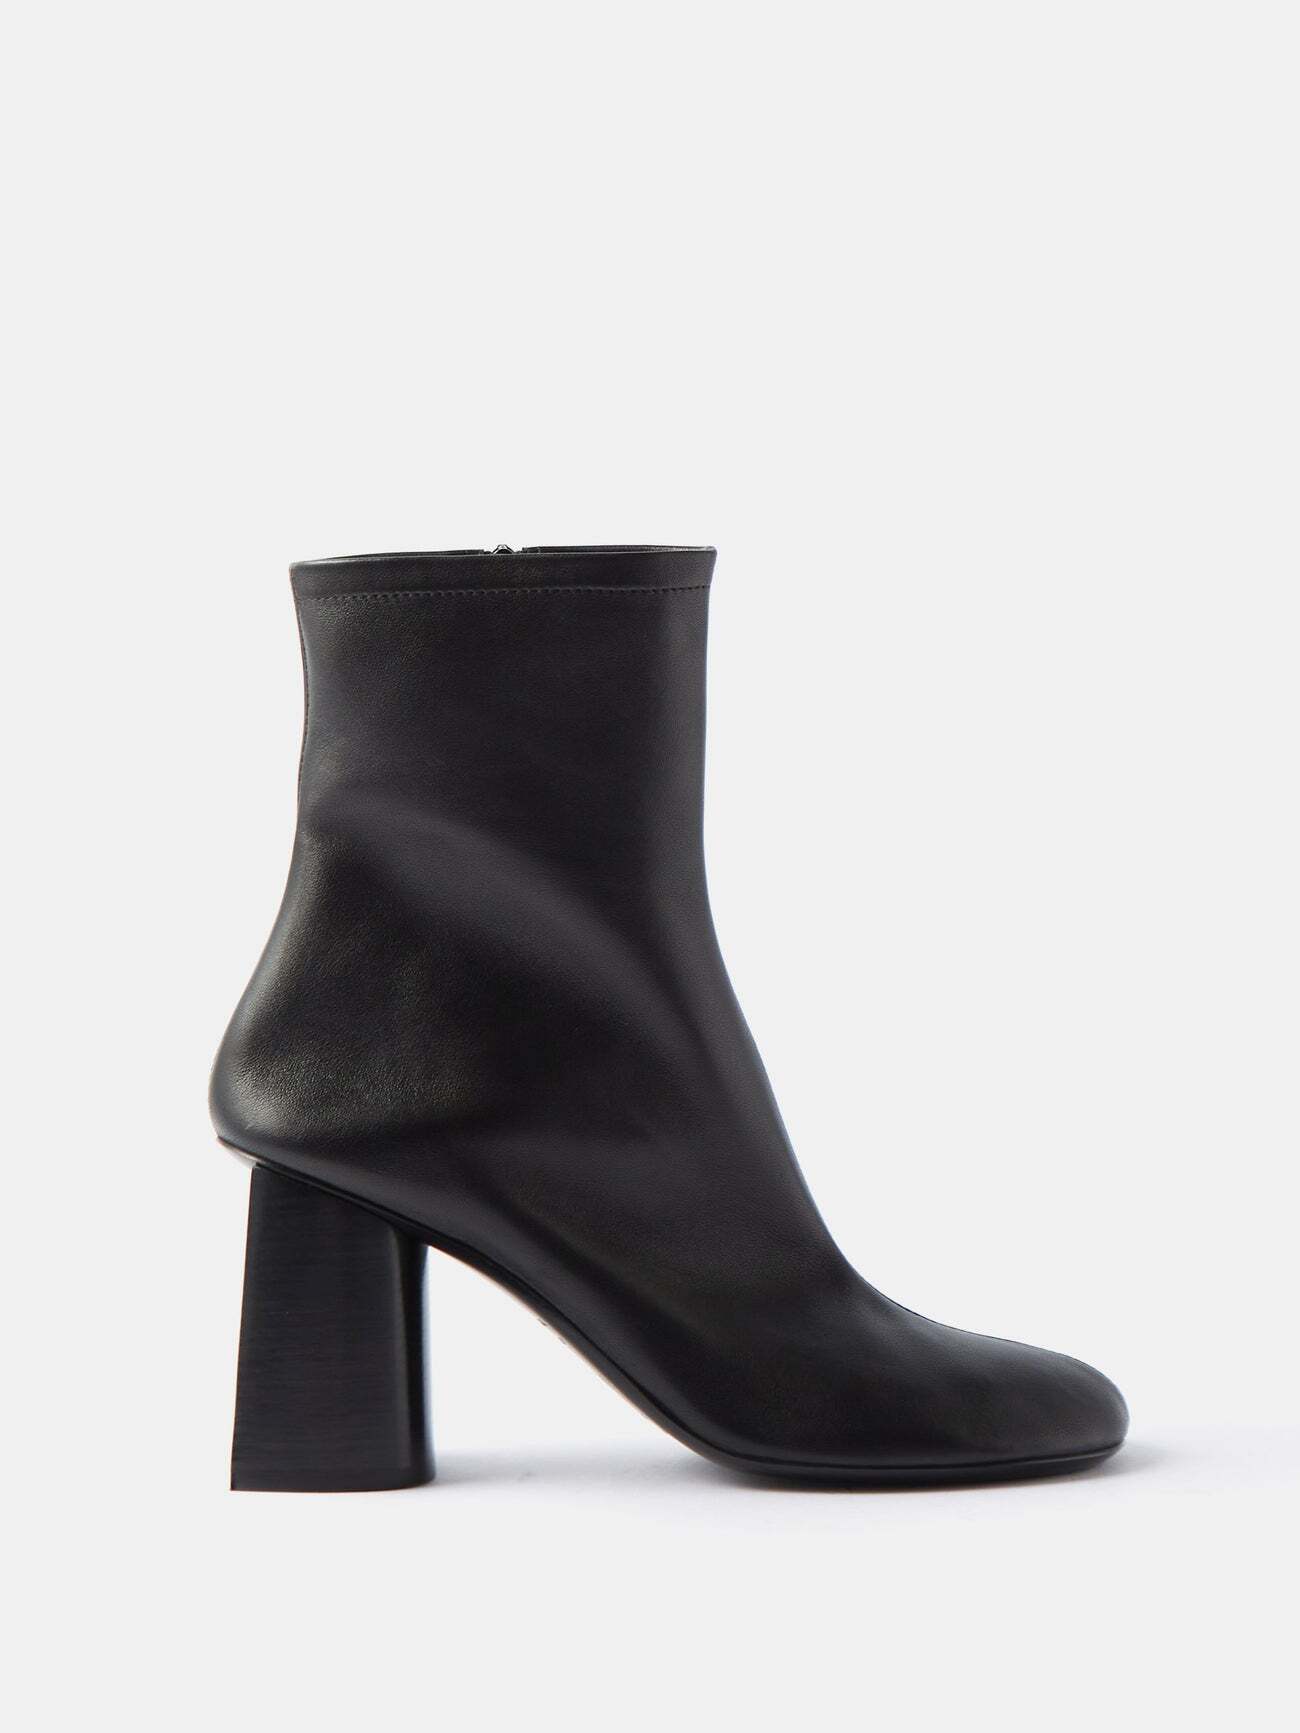 Balenciaga - Glove 80 Inverted-heel Leather Ankle Boots - Womens - Black